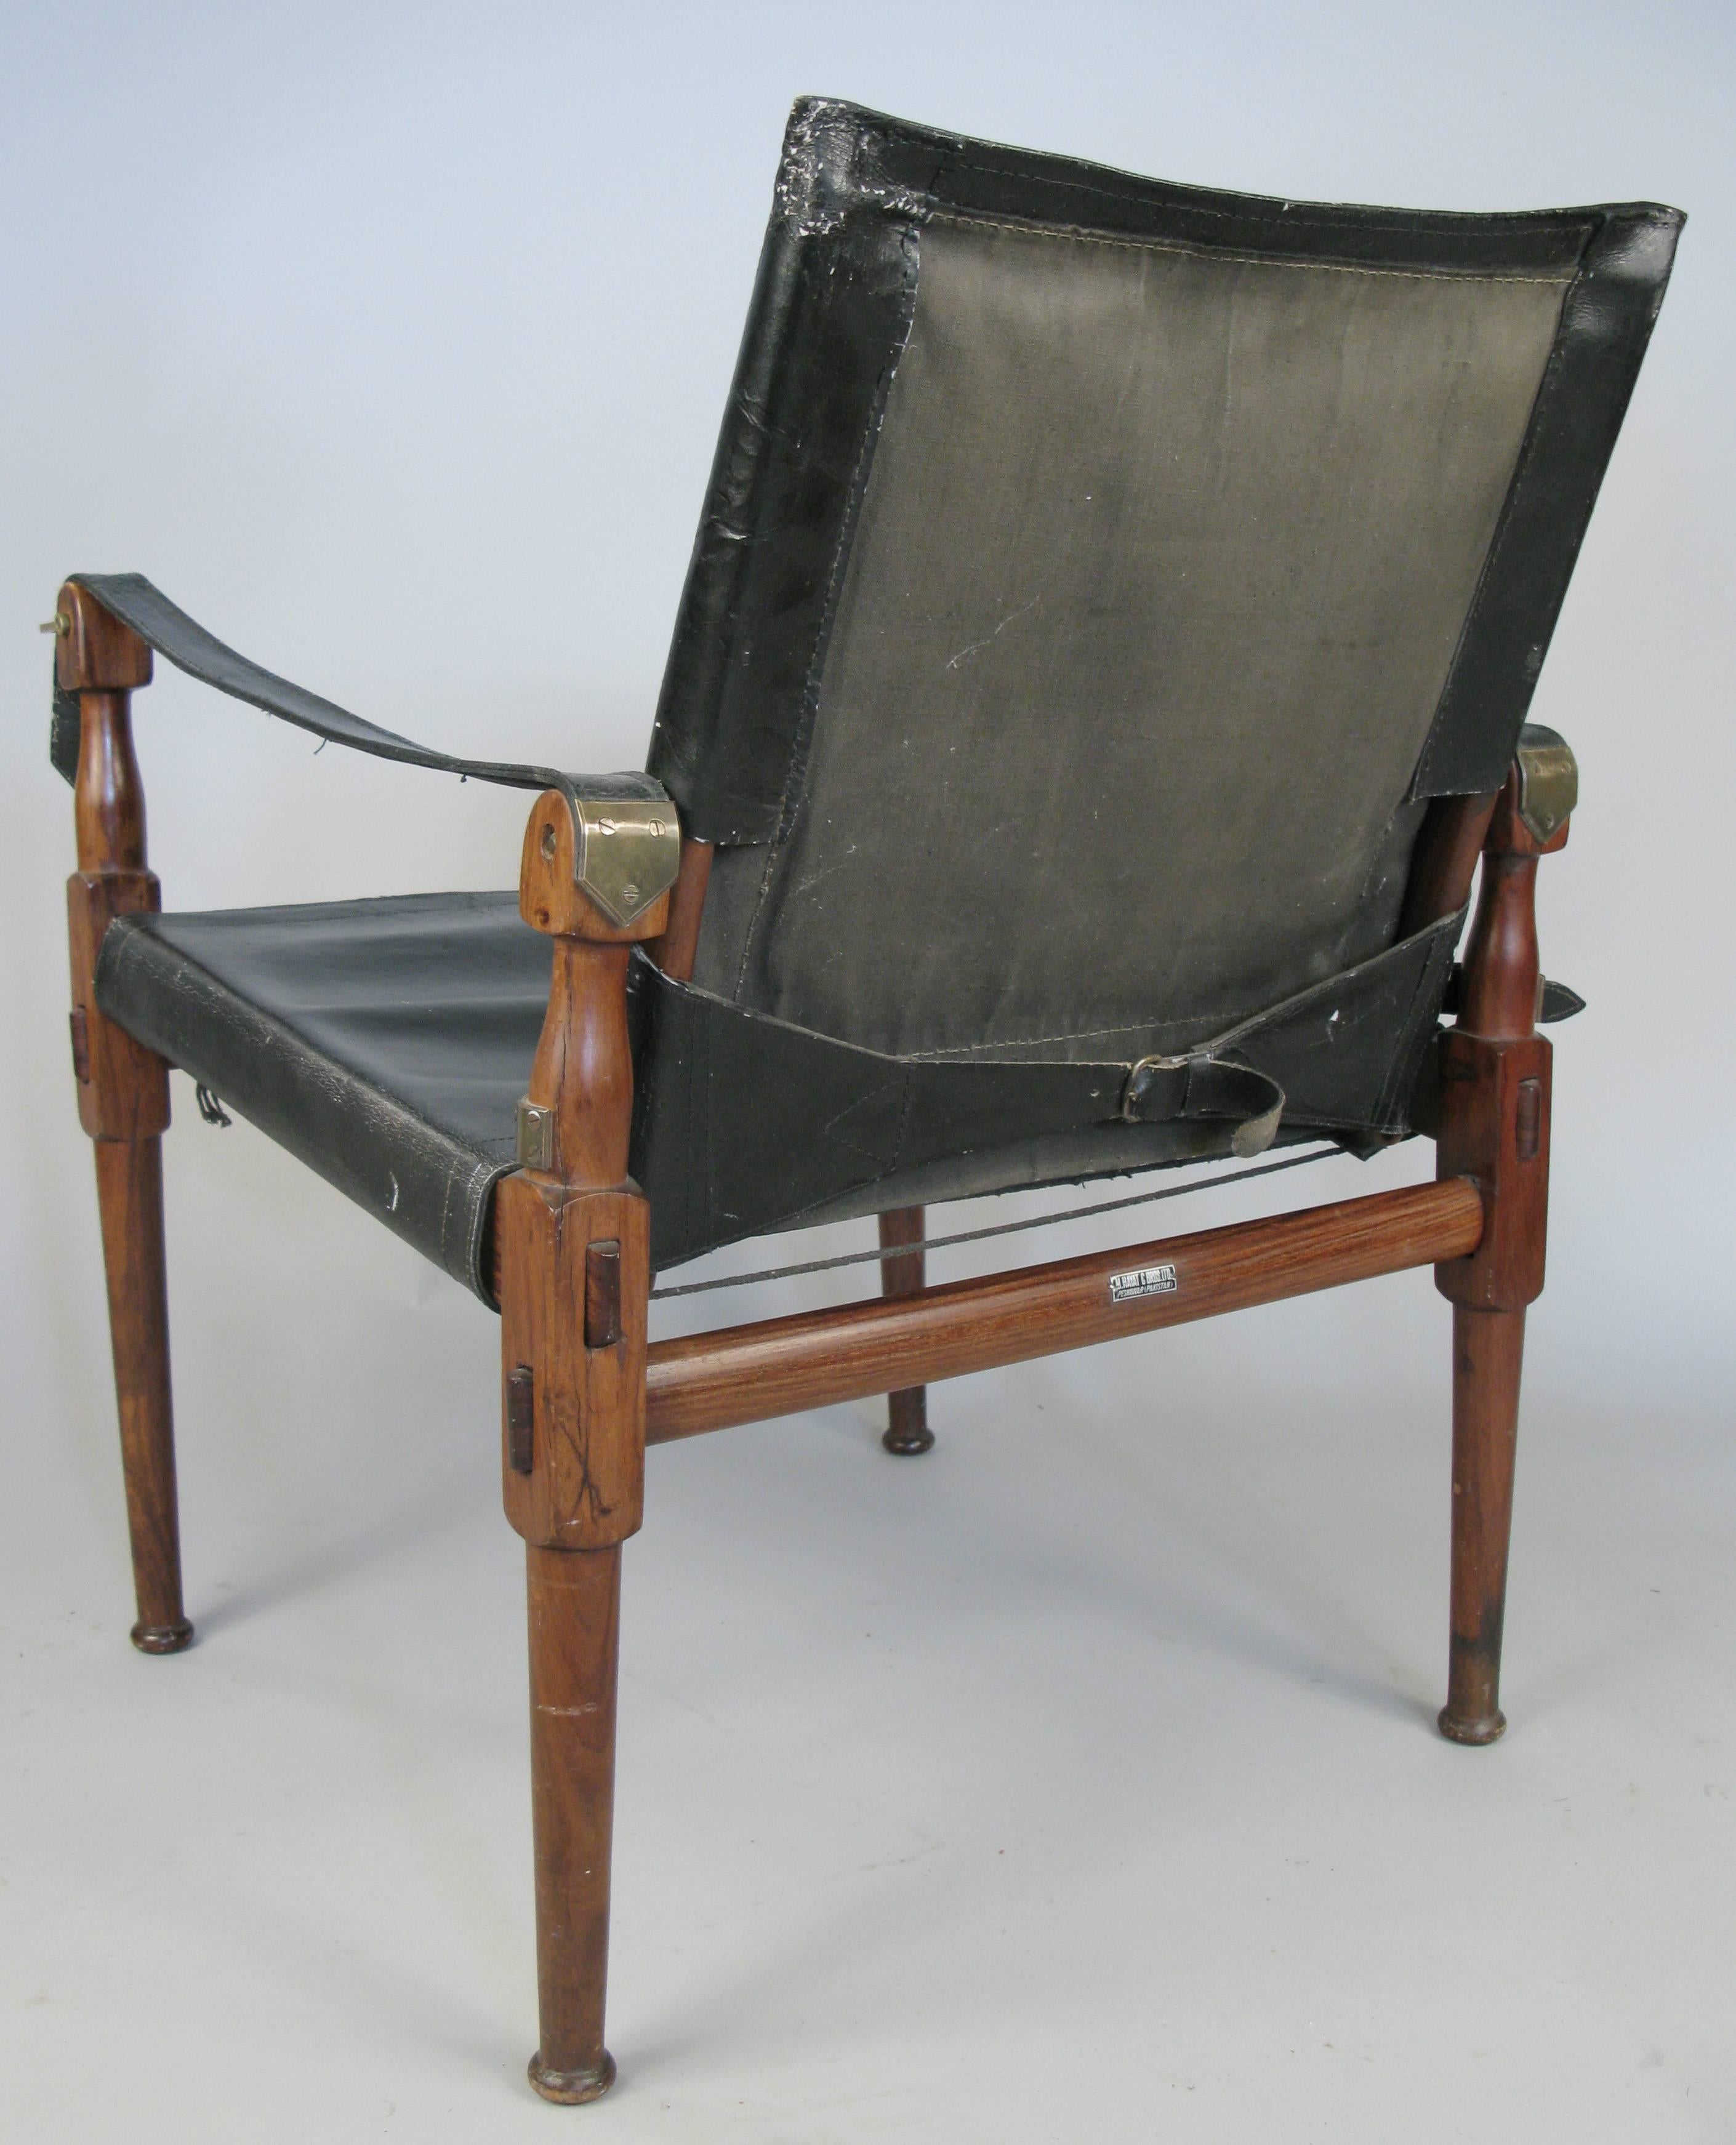 A Classic vintage mid-20th century safari Campaign chair with rosewood frame and black leather seat and back. Made in M. Hayat in Pakistan.